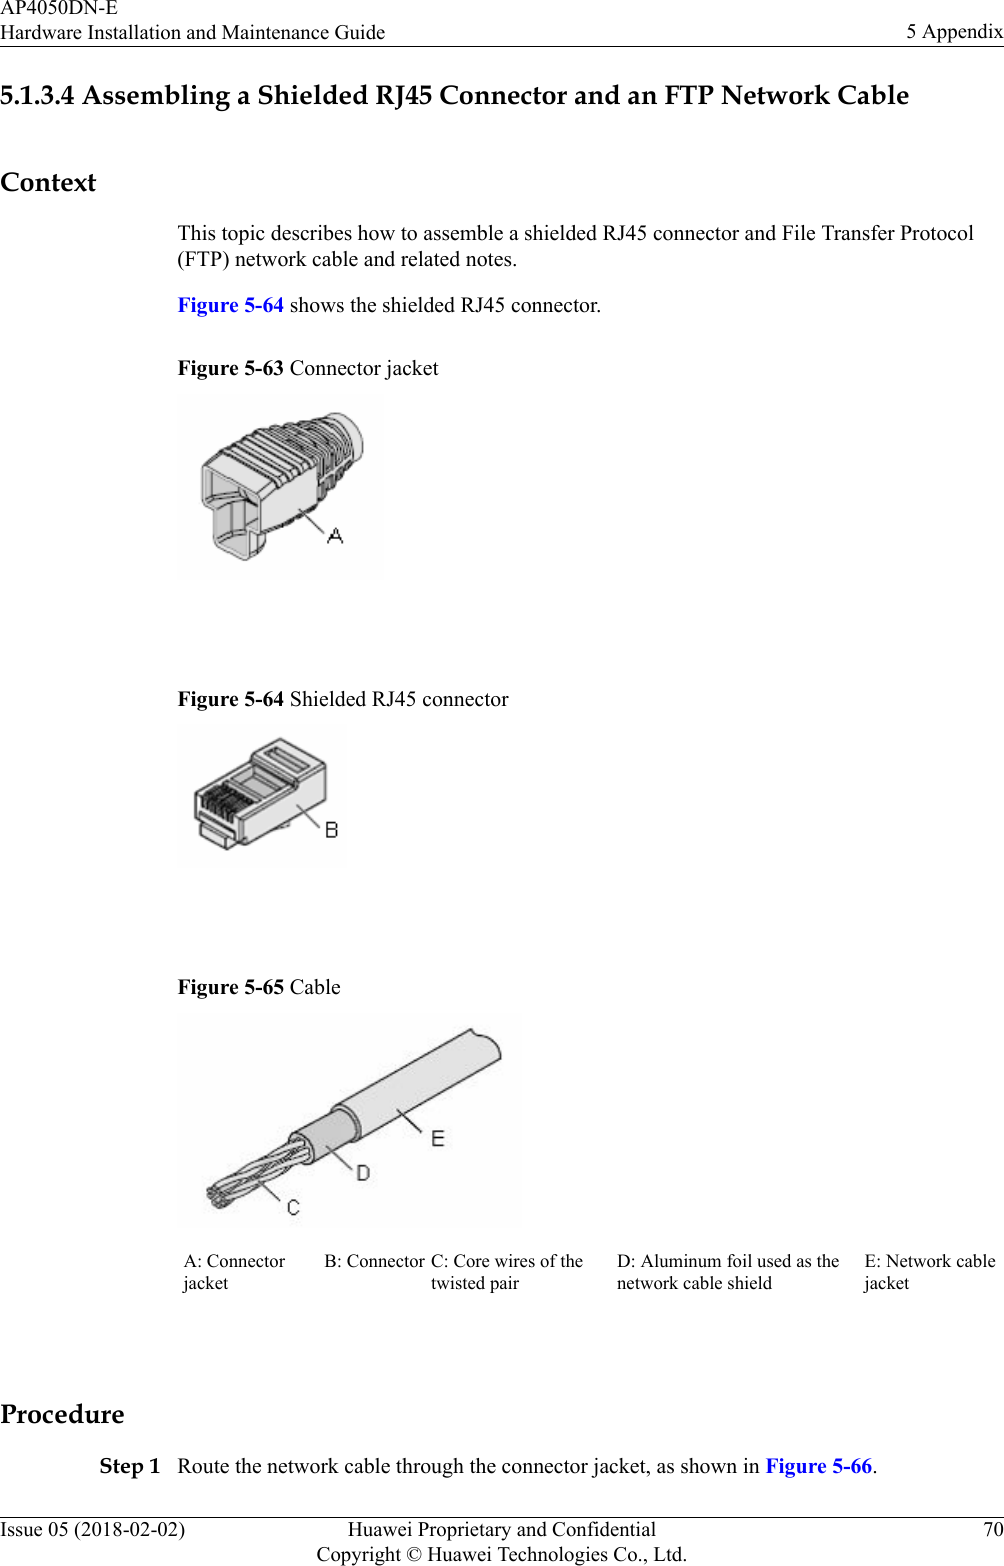 5.1.3.4 Assembling a Shielded RJ45 Connector and an FTP Network CableContextThis topic describes how to assemble a shielded RJ45 connector and File Transfer Protocol(FTP) network cable and related notes.Figure 5-64 shows the shielded RJ45 connector.Figure 5-63 Connector jacket Figure 5-64 Shielded RJ45 connector Figure 5-65 CableA: ConnectorjacketB: Connector C: Core wires of thetwisted pairD: Aluminum foil used as thenetwork cable shieldE: Network cablejacket ProcedureStep 1 Route the network cable through the connector jacket, as shown in Figure 5-66.AP4050DN-EHardware Installation and Maintenance Guide 5 AppendixIssue 05 (2018-02-02) Huawei Proprietary and ConfidentialCopyright © Huawei Technologies Co., Ltd.70